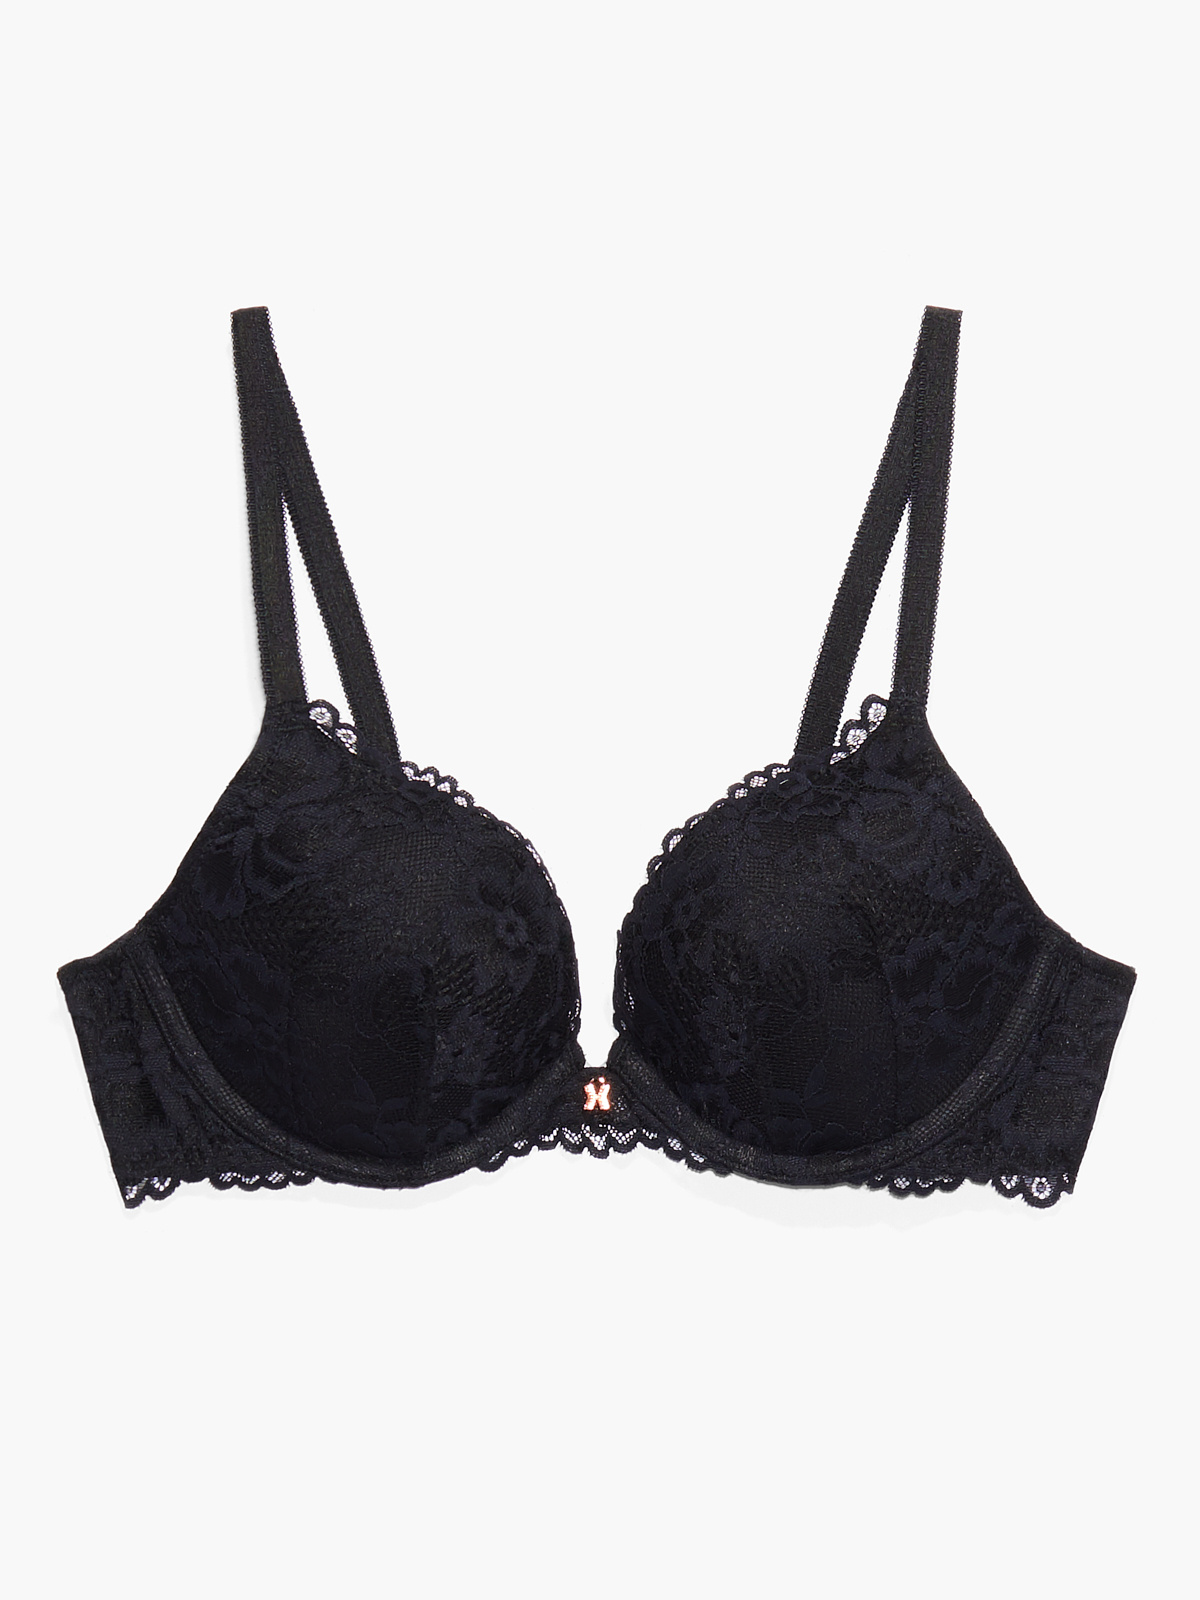 Floral Lace Push-Up Bra in Black